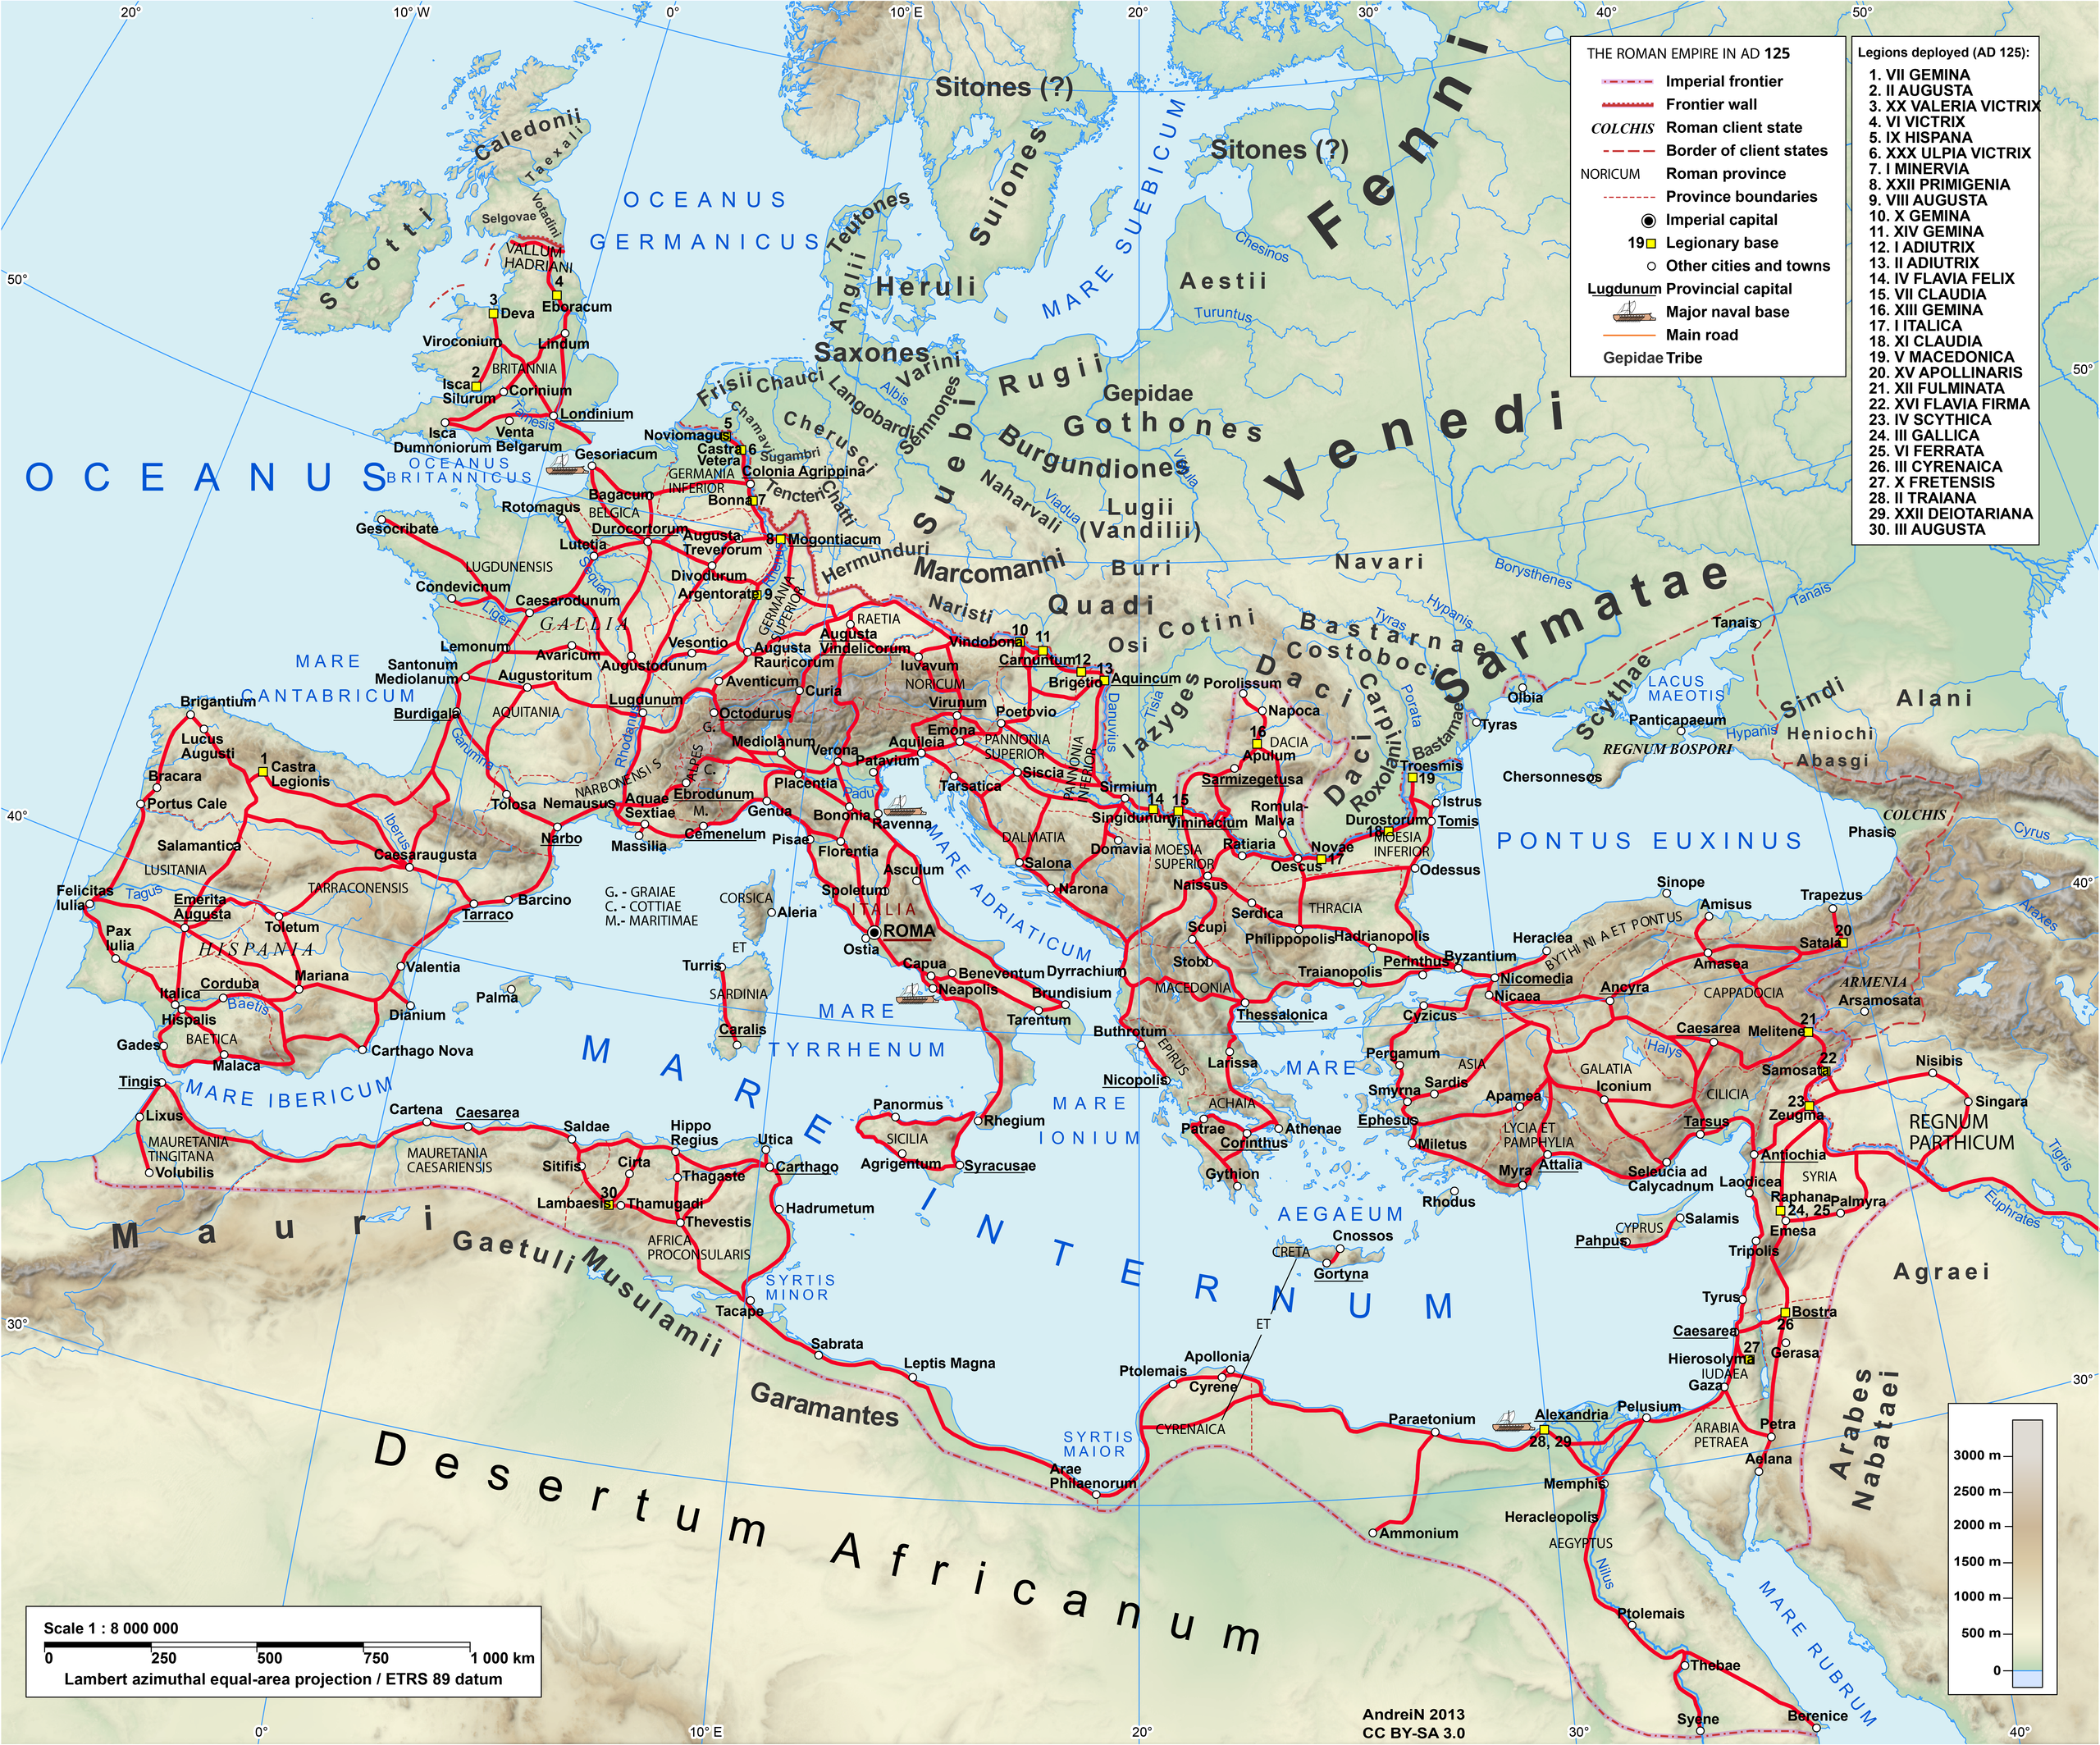 roads in ancient roman empire By DS28 - File:Roman Empire 125 general map.SVG, CC BY-SA 4.0, https://commons.wikimedia.org/w/index.php?curid=68002775